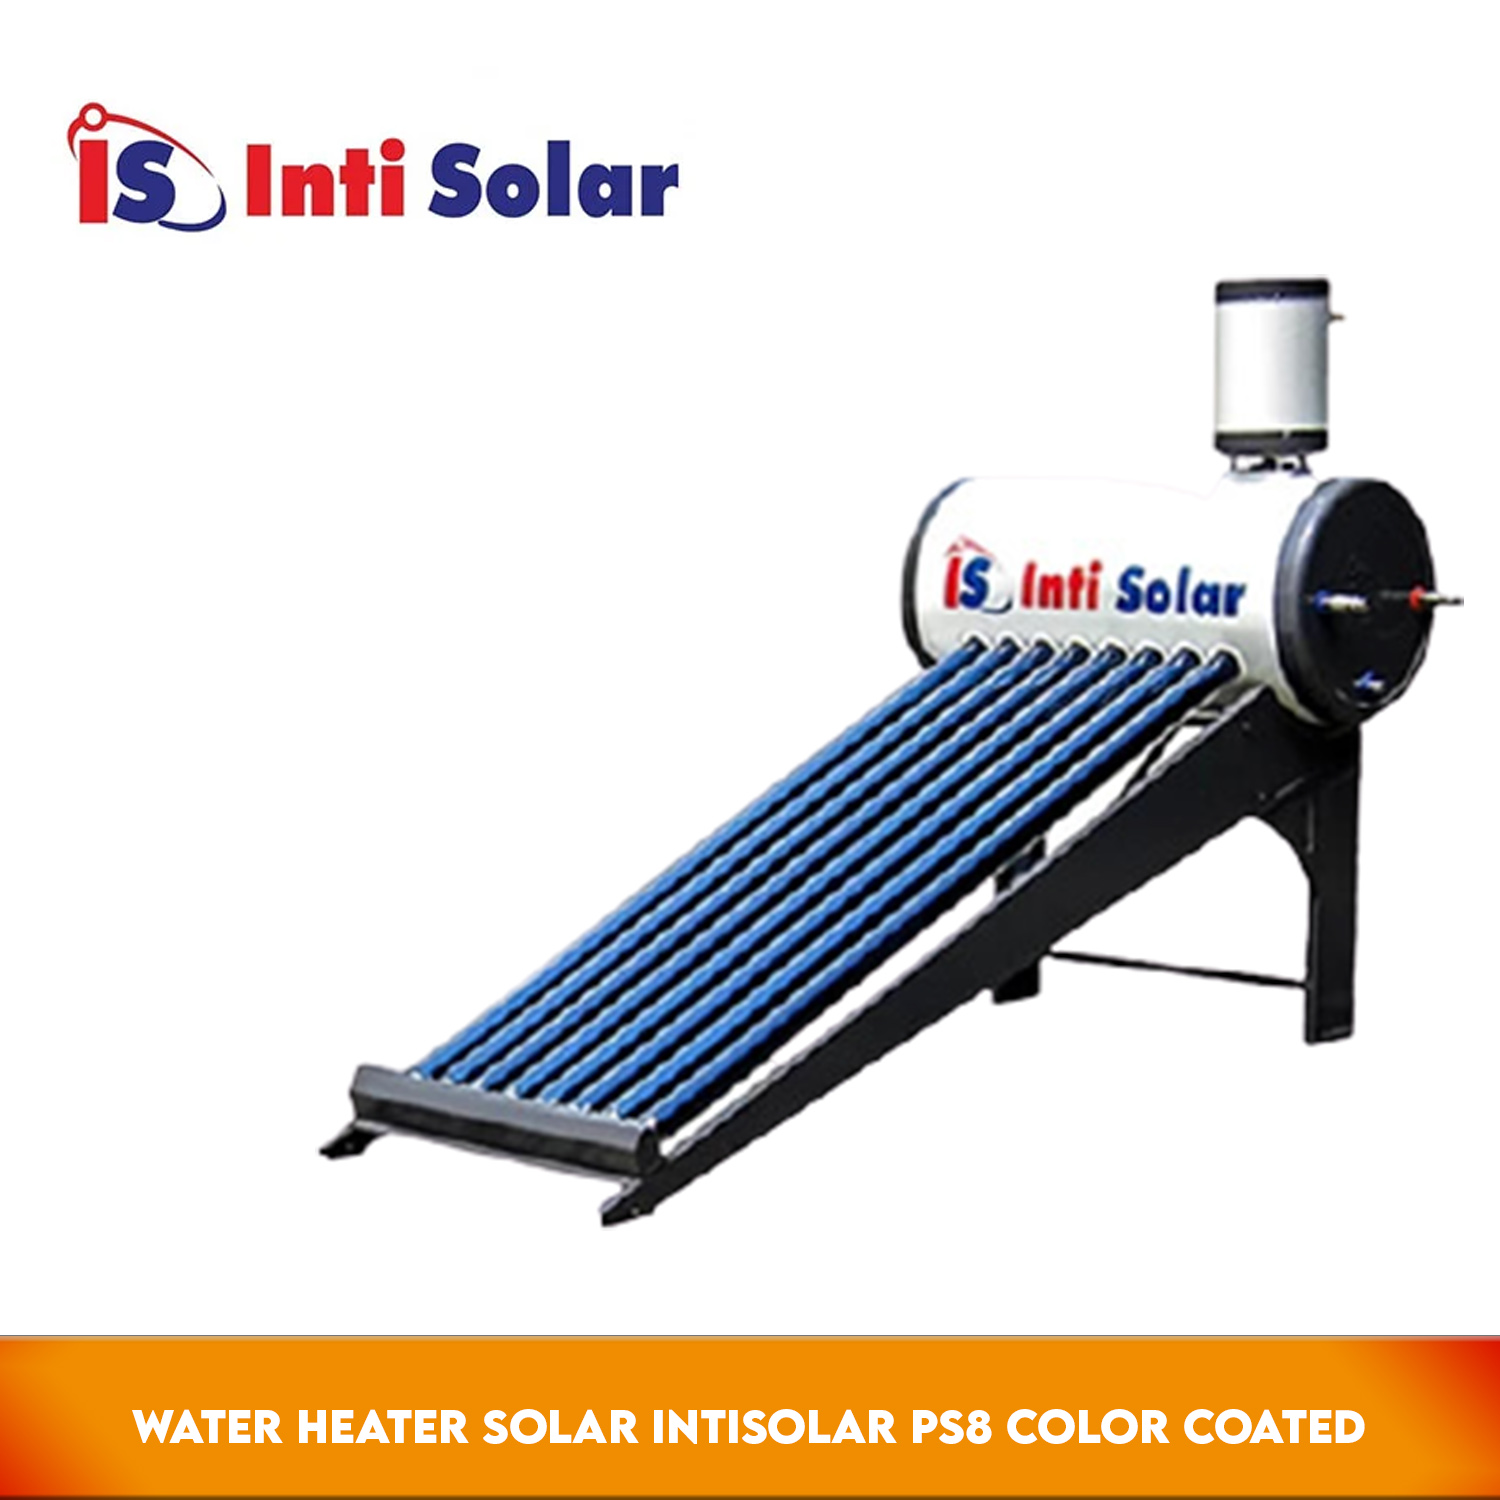 Intisolar Water Heater Solar PS8 Color Coated 80 Liter - Pemanas Air 